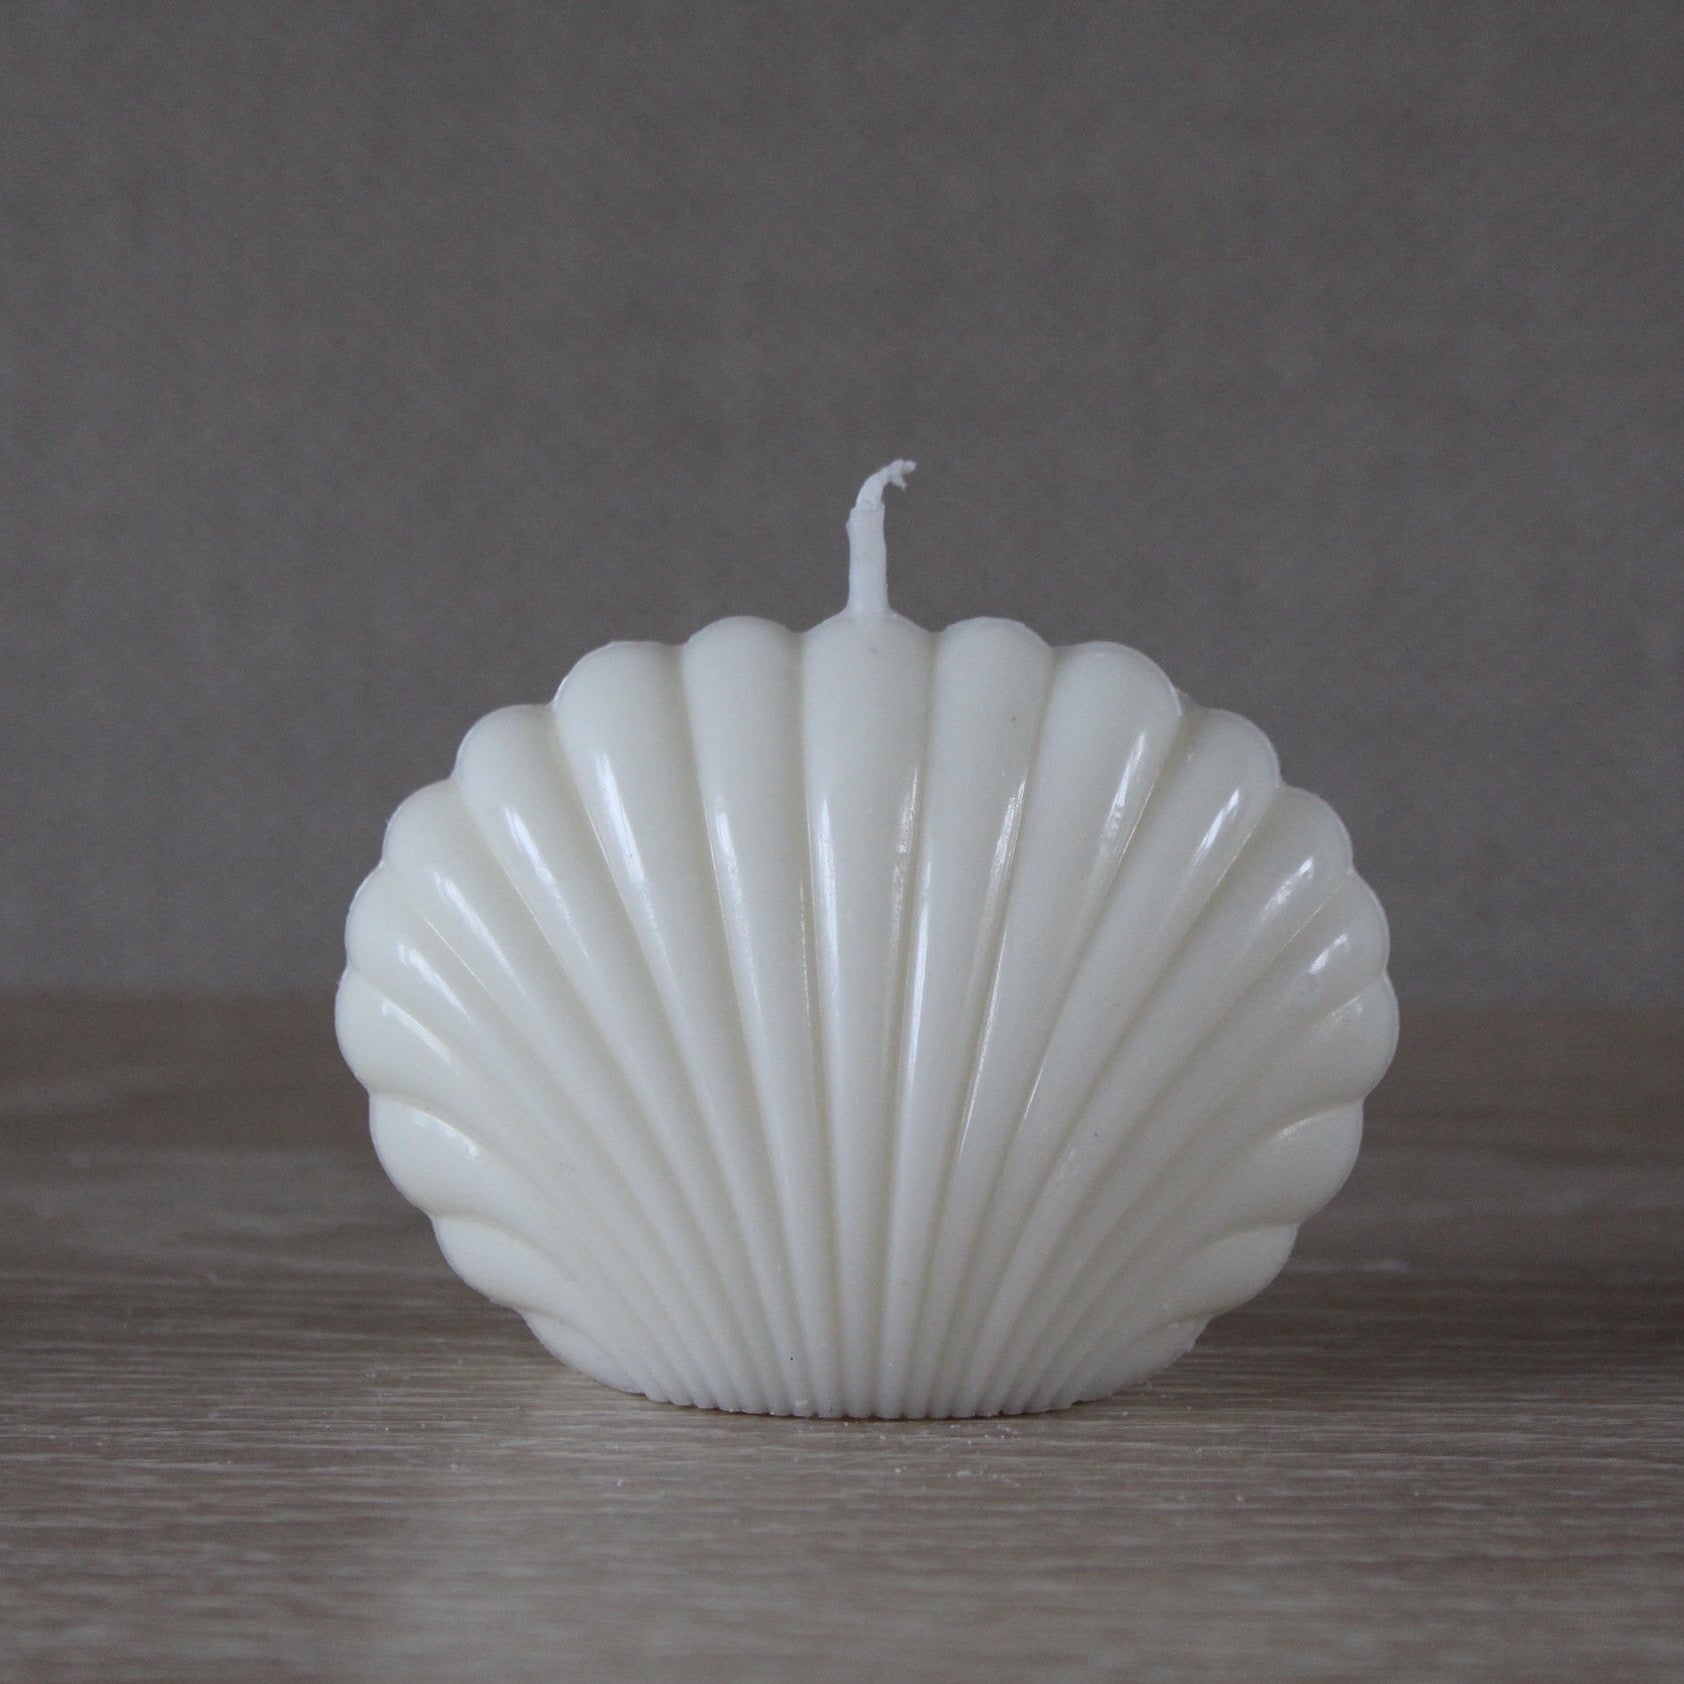 Handmade Soy Candle - Small Scallop Shell